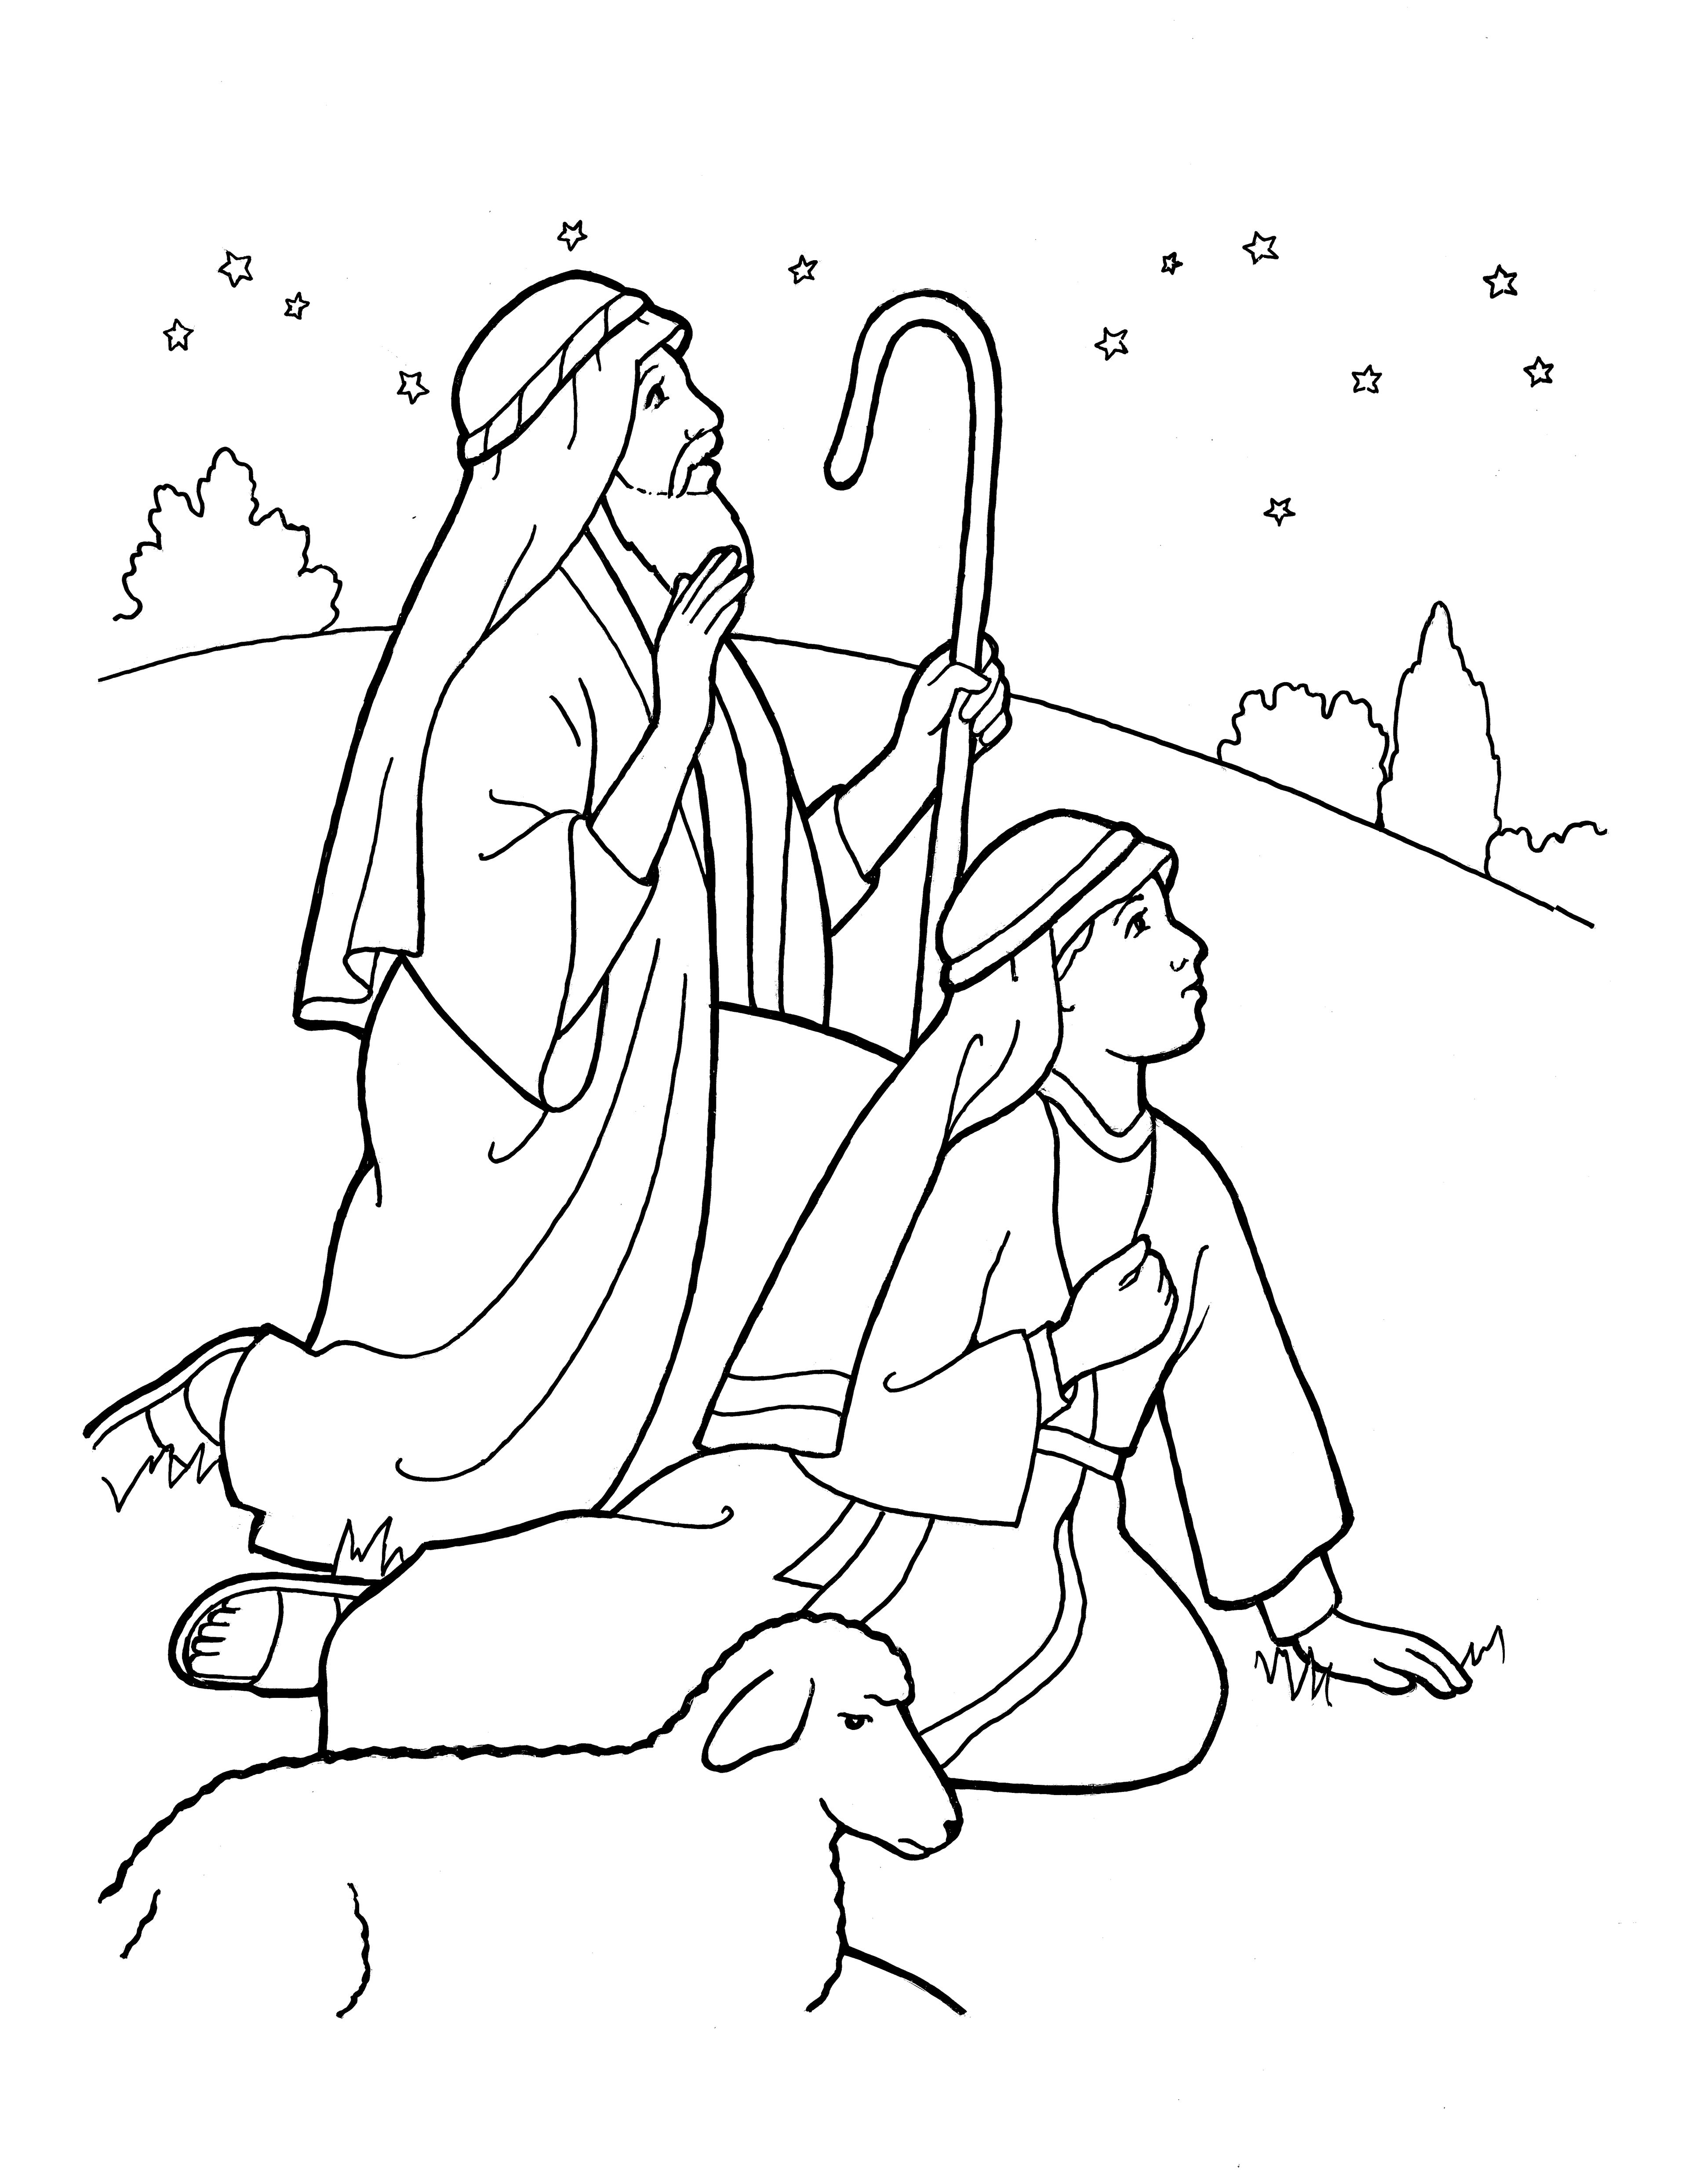 An illustration of the shepherds on Christmas night, from the nursery manual Behold Your Little Ones (2008), page 127.